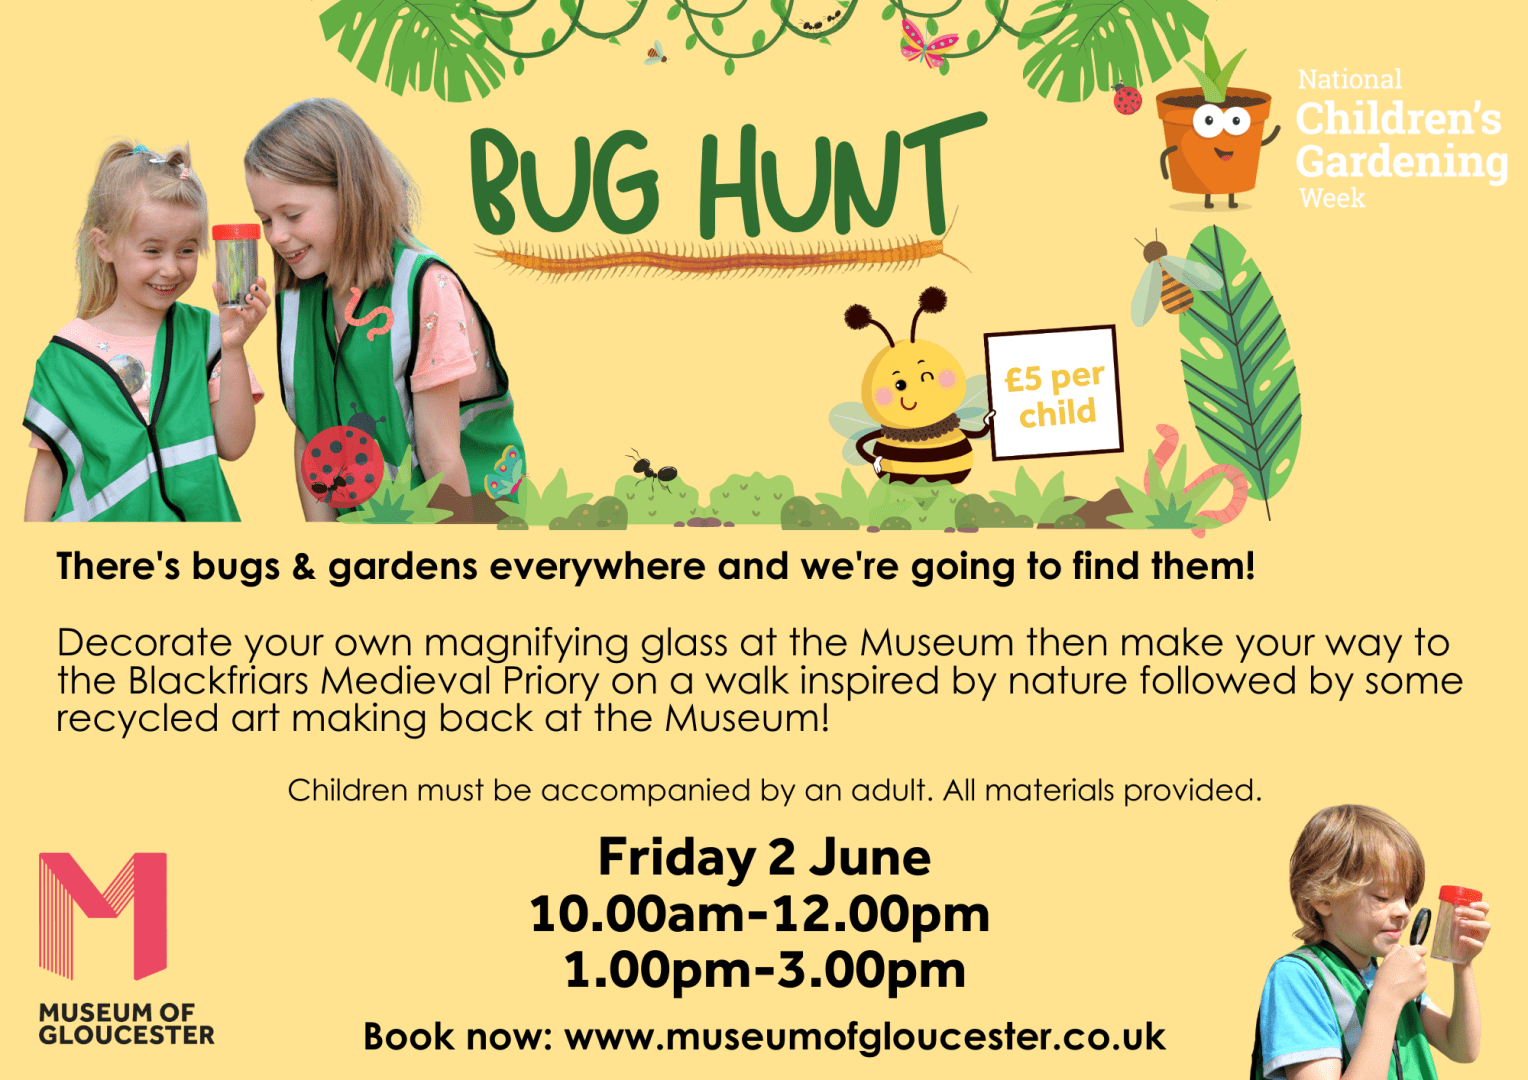 Museum of Gloucester Bug Hunt on Friday 2nd June between 10am to 3pm.